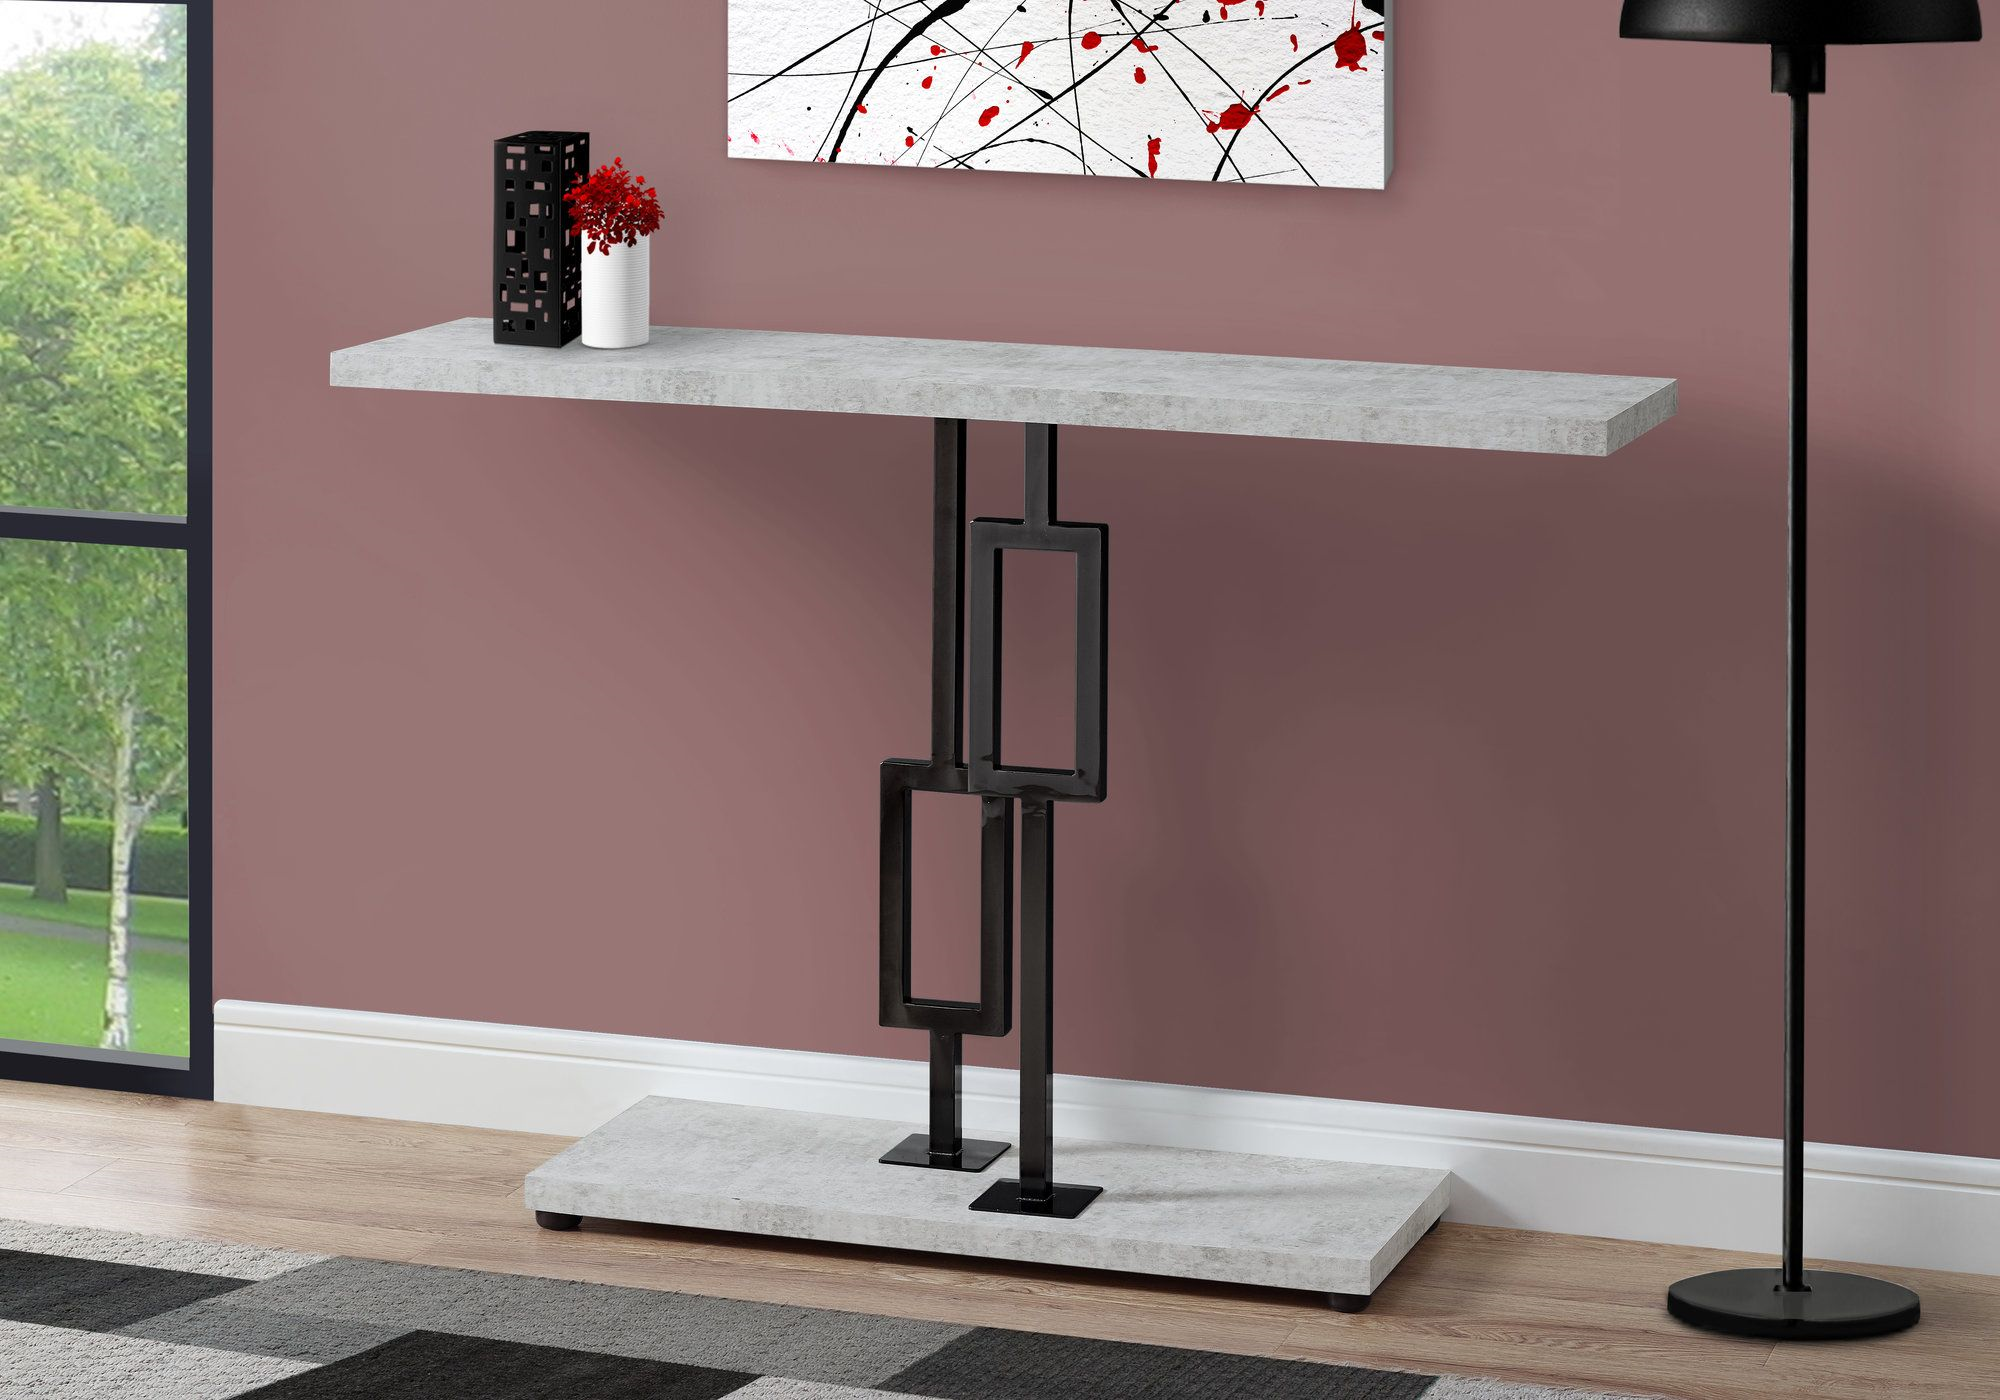 I 3267 - ACCENT TABLE - 48"L / GREY CEMENT / BLACK NICKEL METAL BY MONARCH SPECIALTIES INC